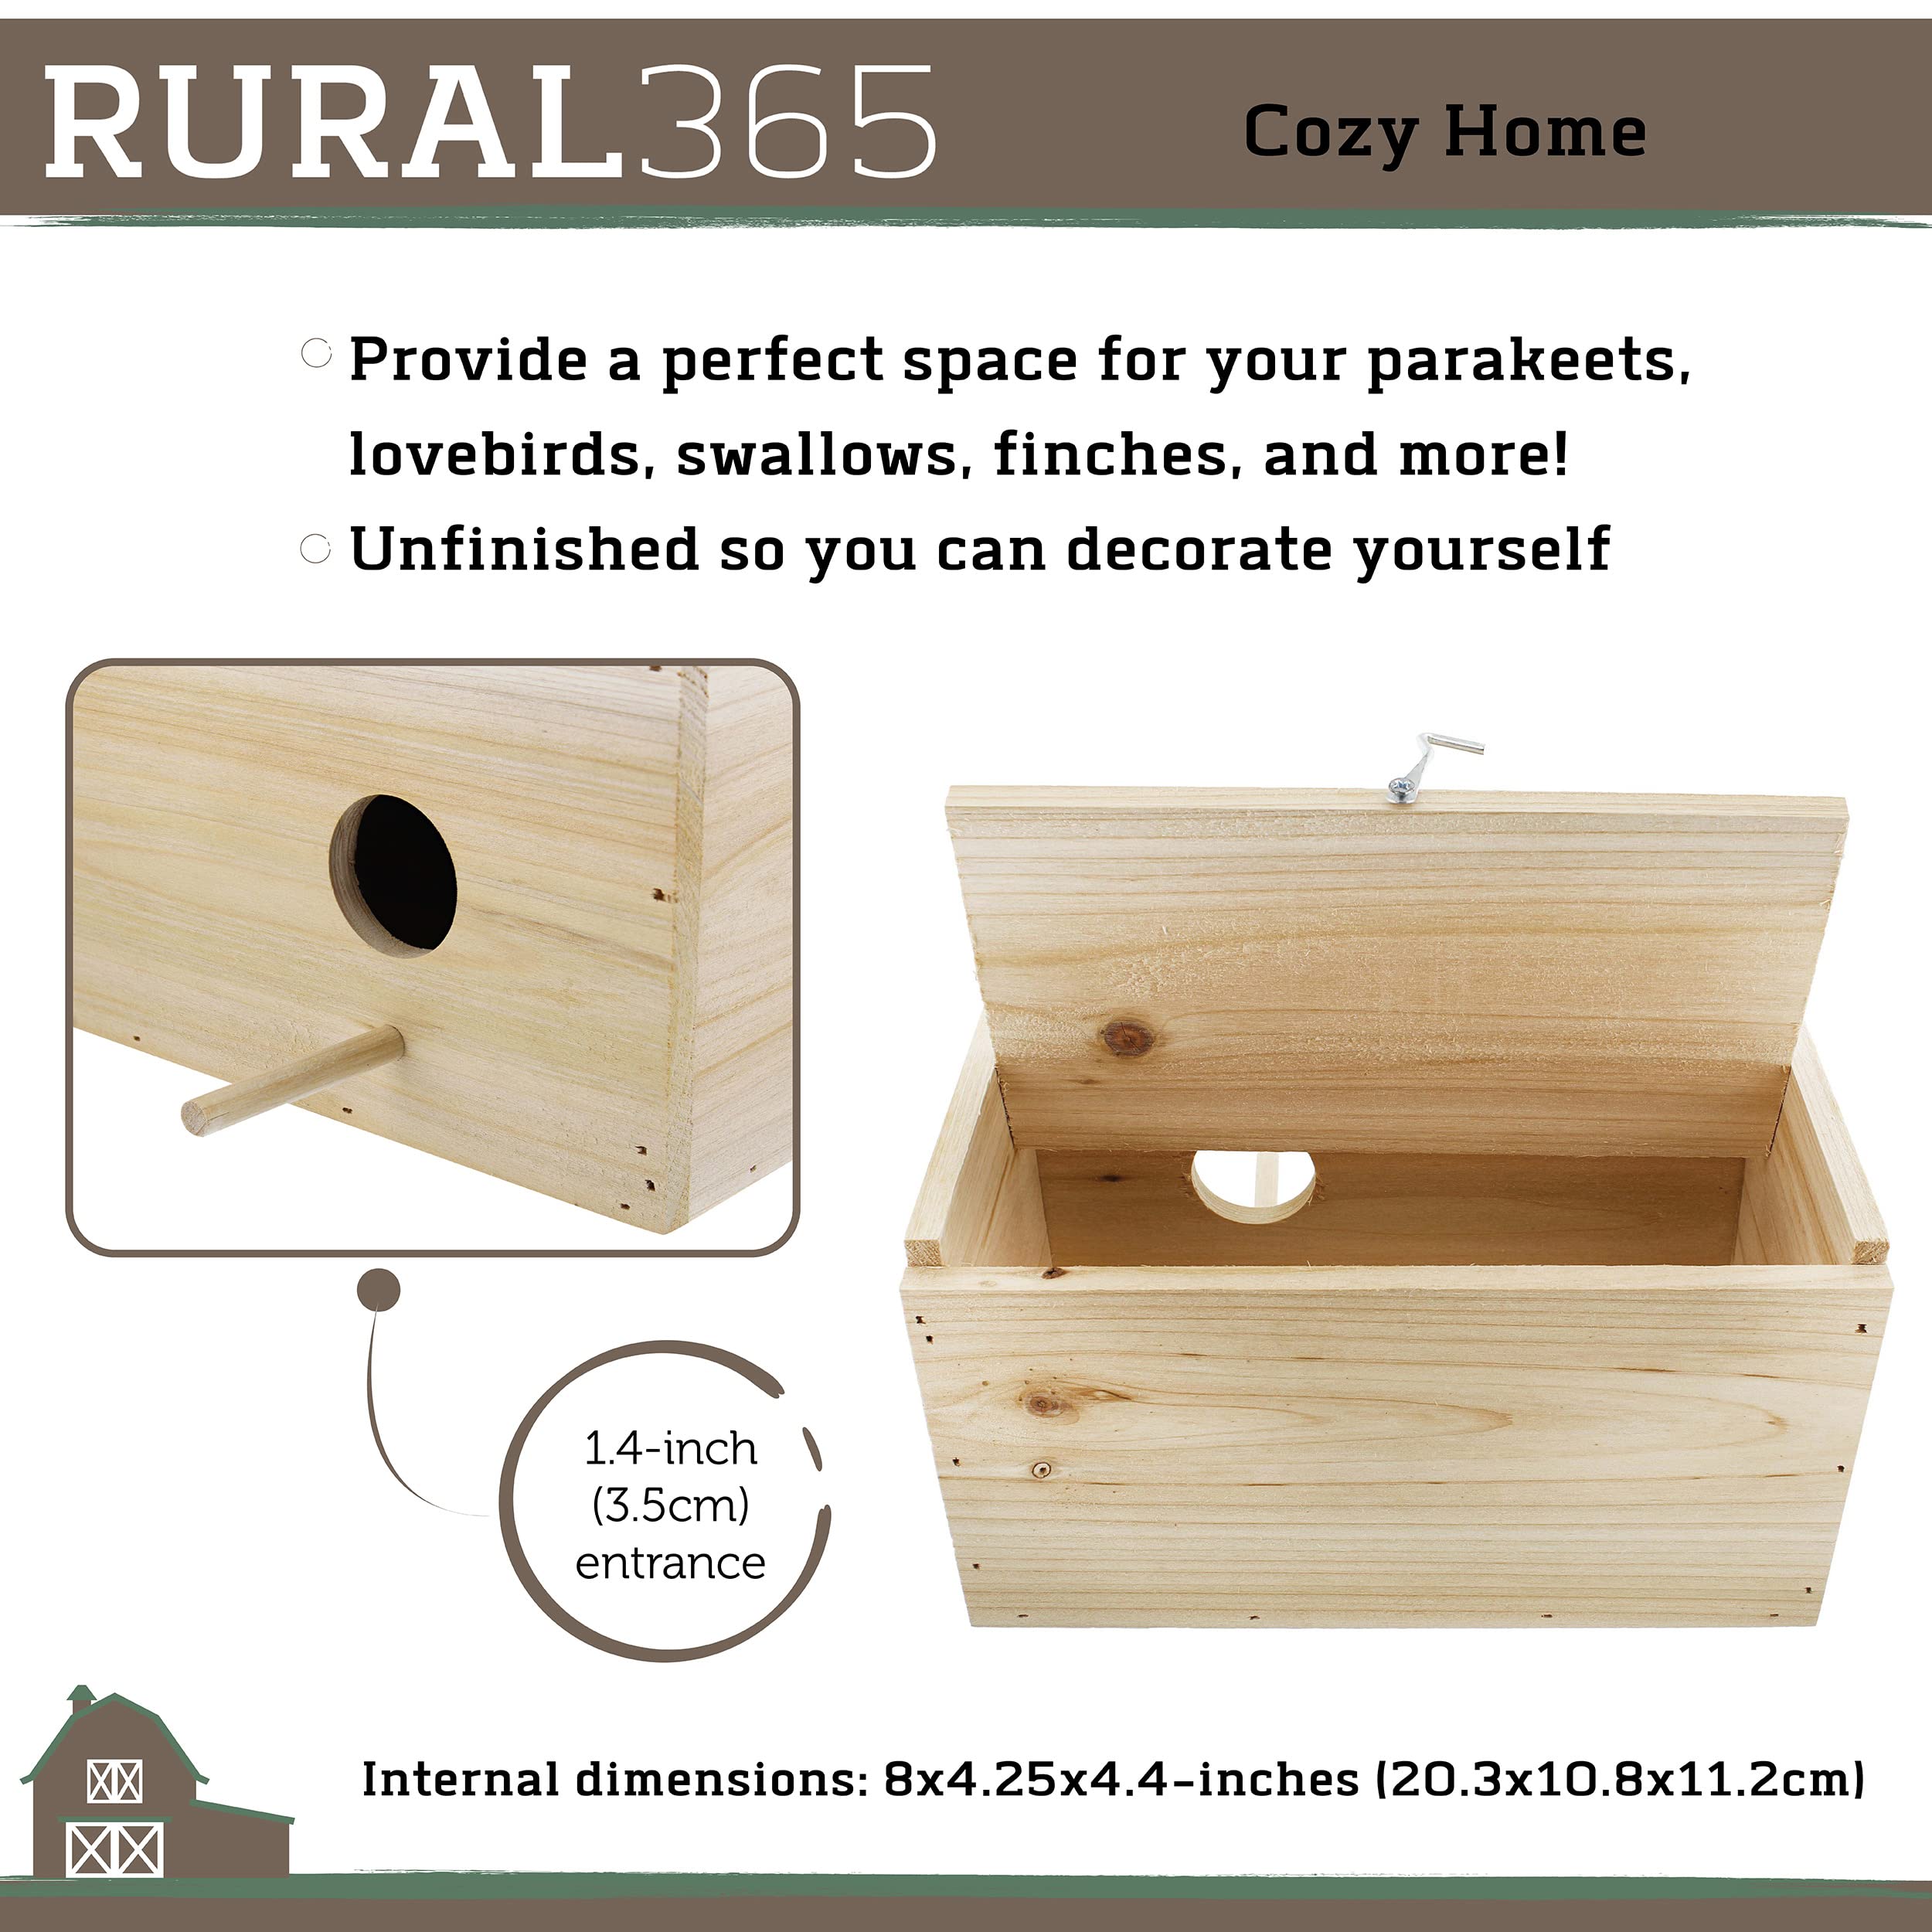 Rural365 Bird Nest Box - Medium 8.7 x 5 x 4.75in Wooden Bird Nesting Boxes for Cages Fits Swallow Finch Parakeet Dove